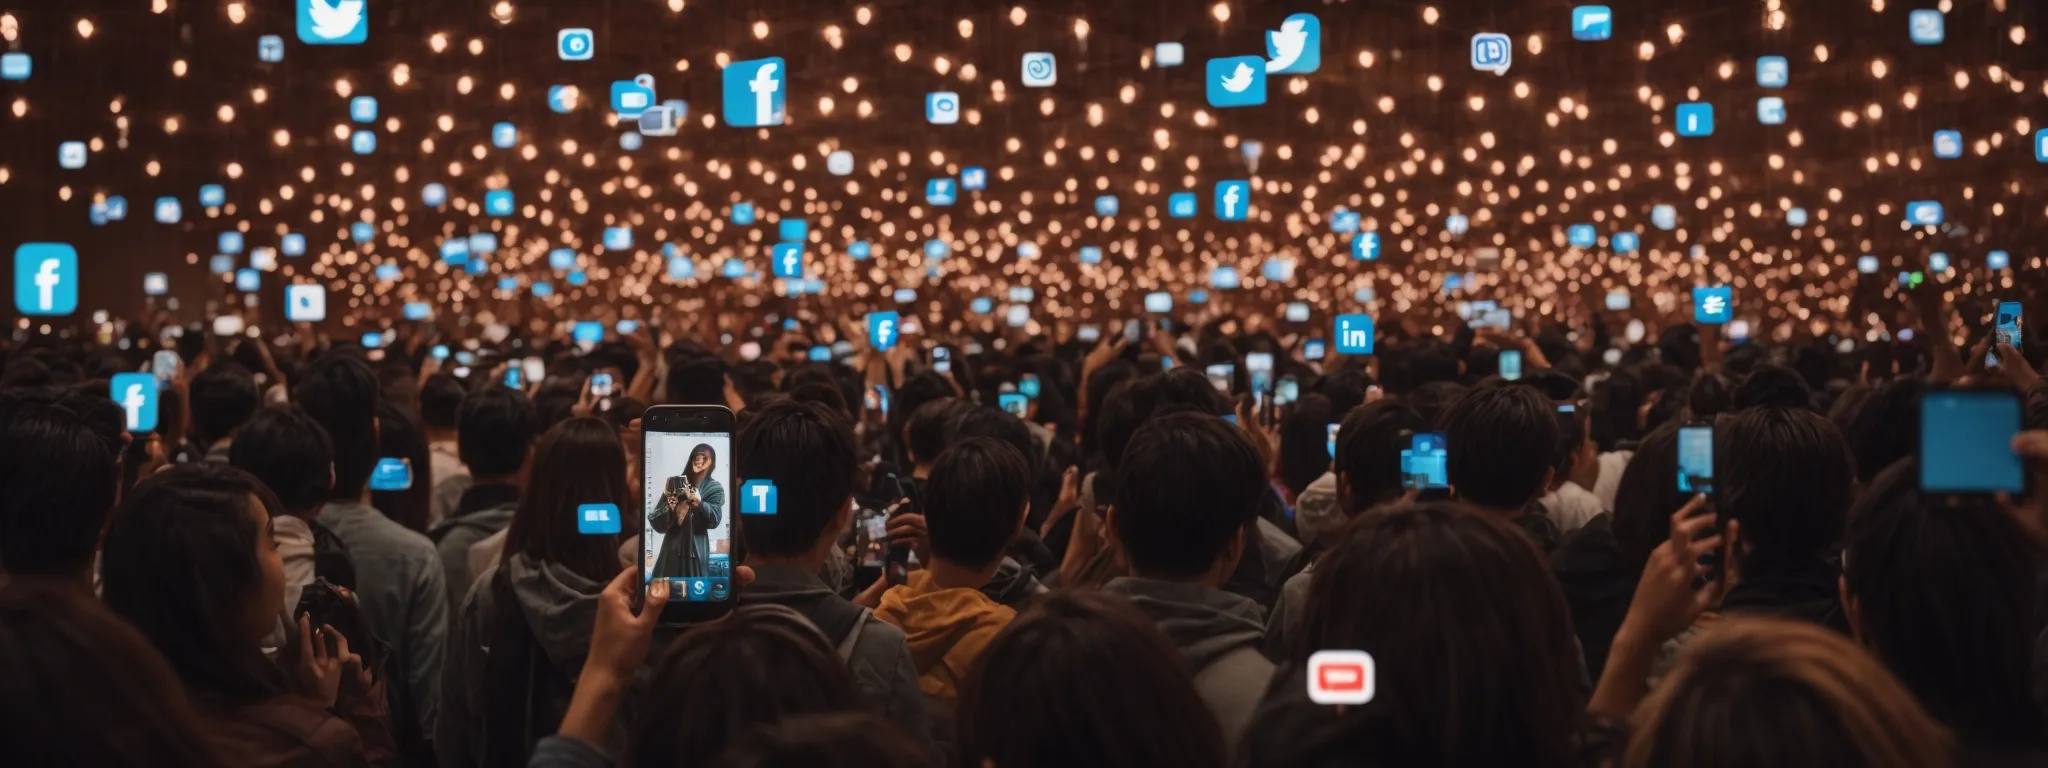 an array of glowing social media icons emanating from a smartphone screen into a room filled with people.